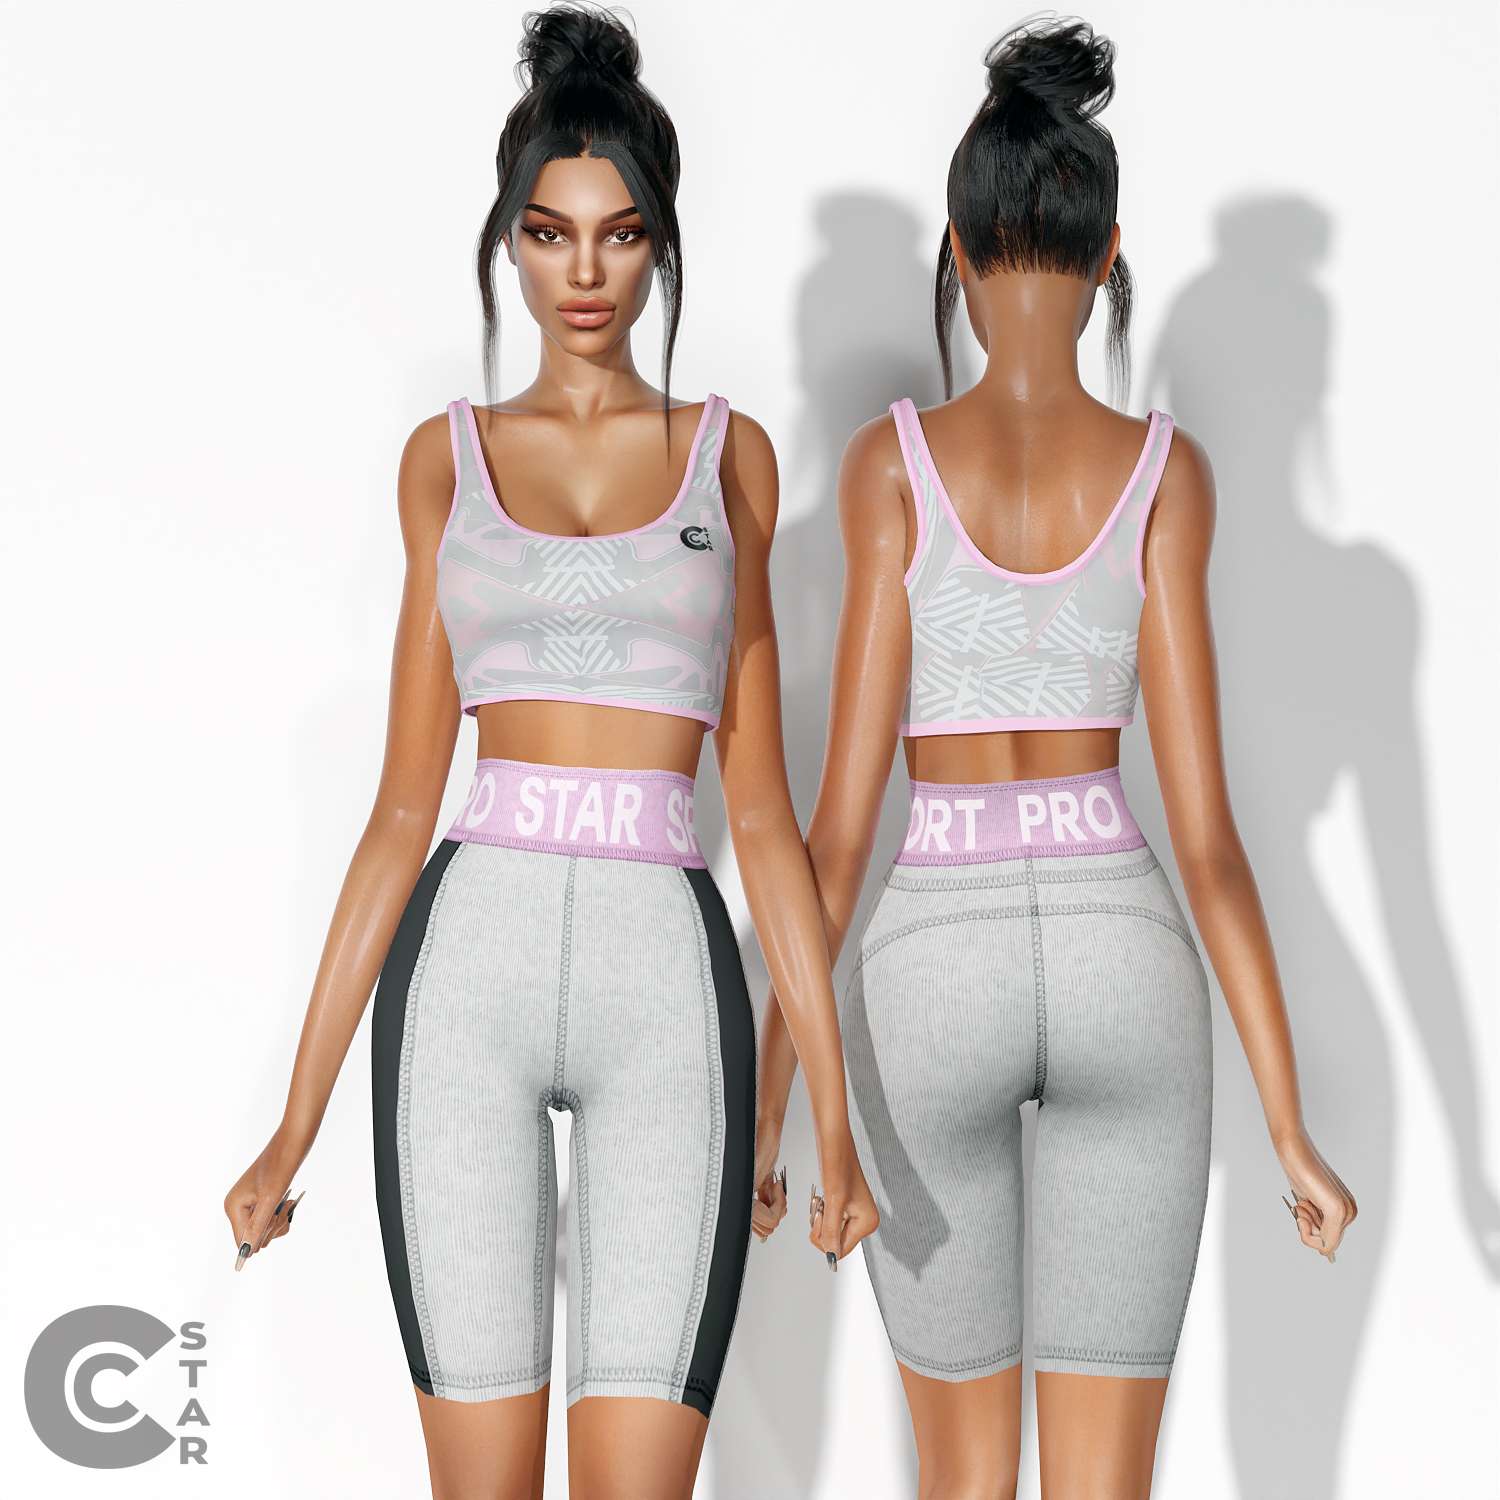 Download Sports Tank Top - The Sims 4 Mods - CurseForge